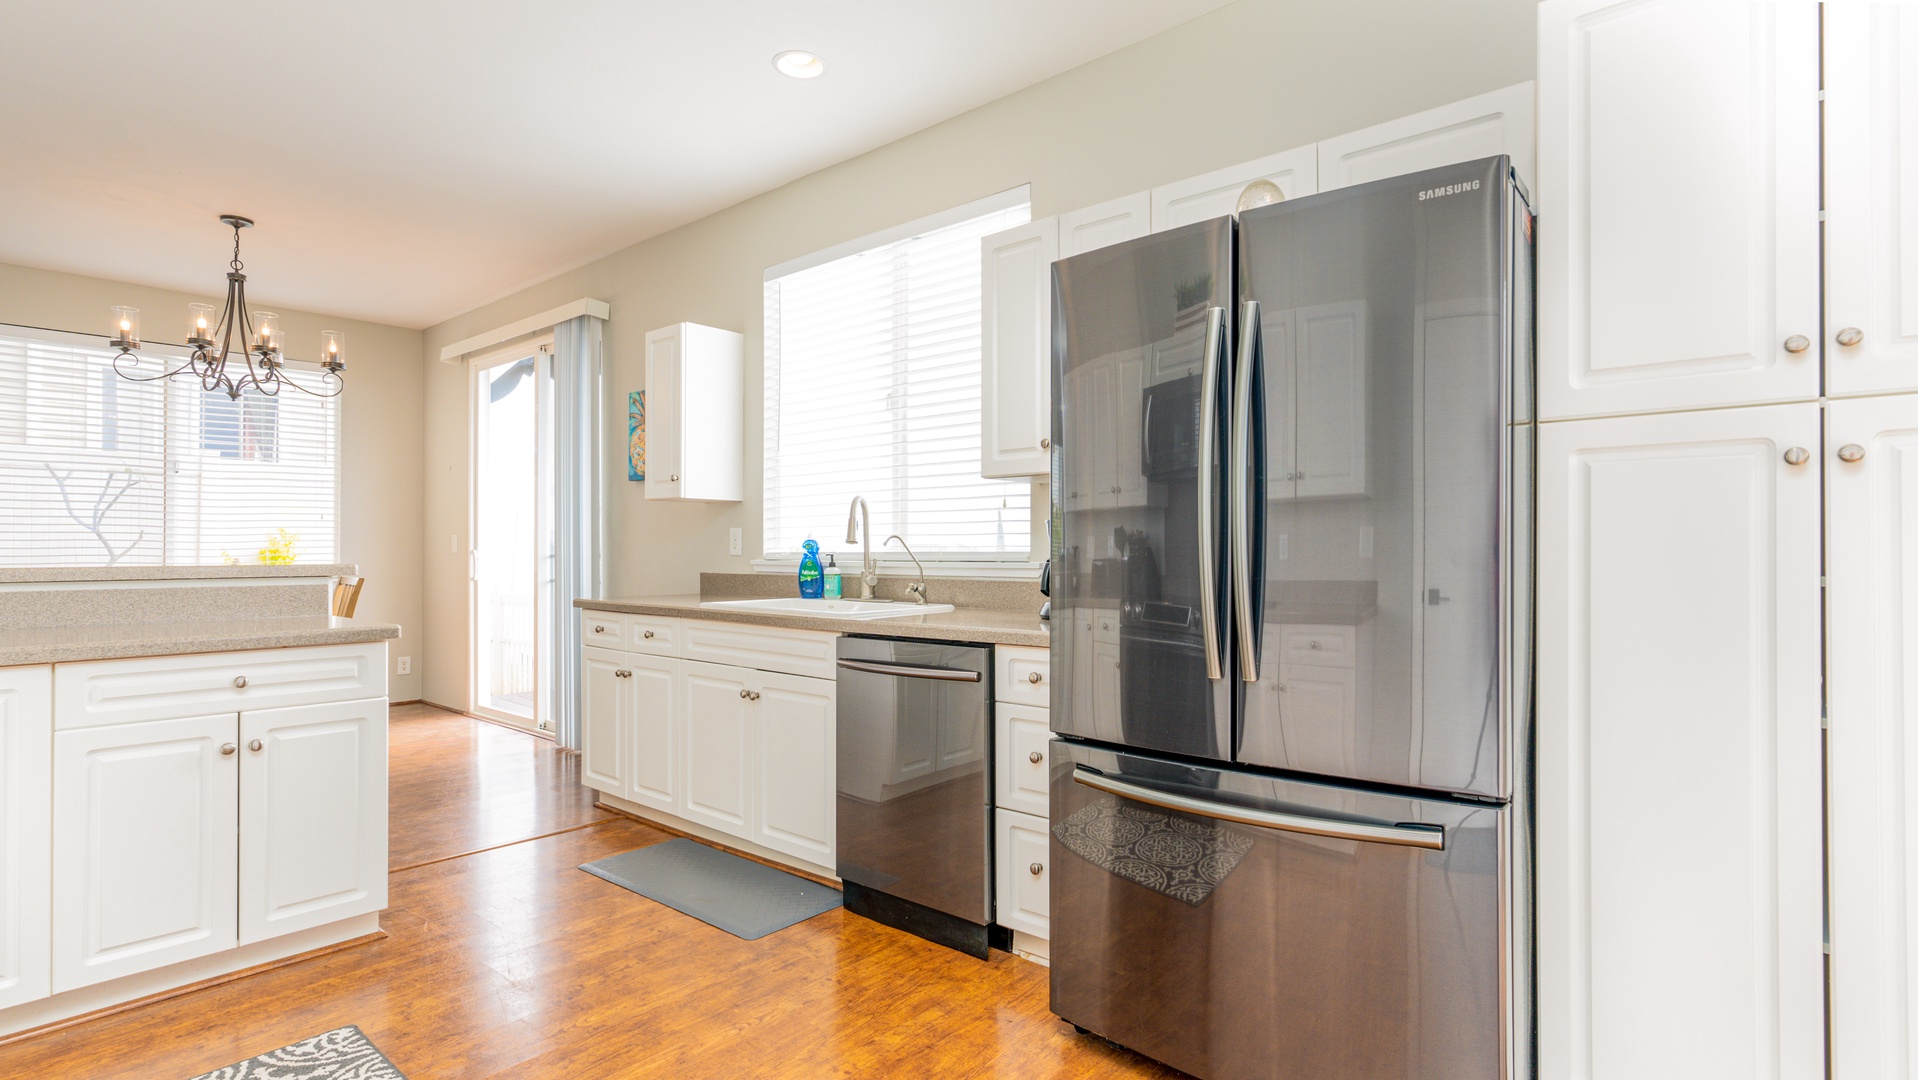 Kapolei Vacation Rentals, Makakilo Elele 48 - Complete appliances for a more relax and convenient stay.